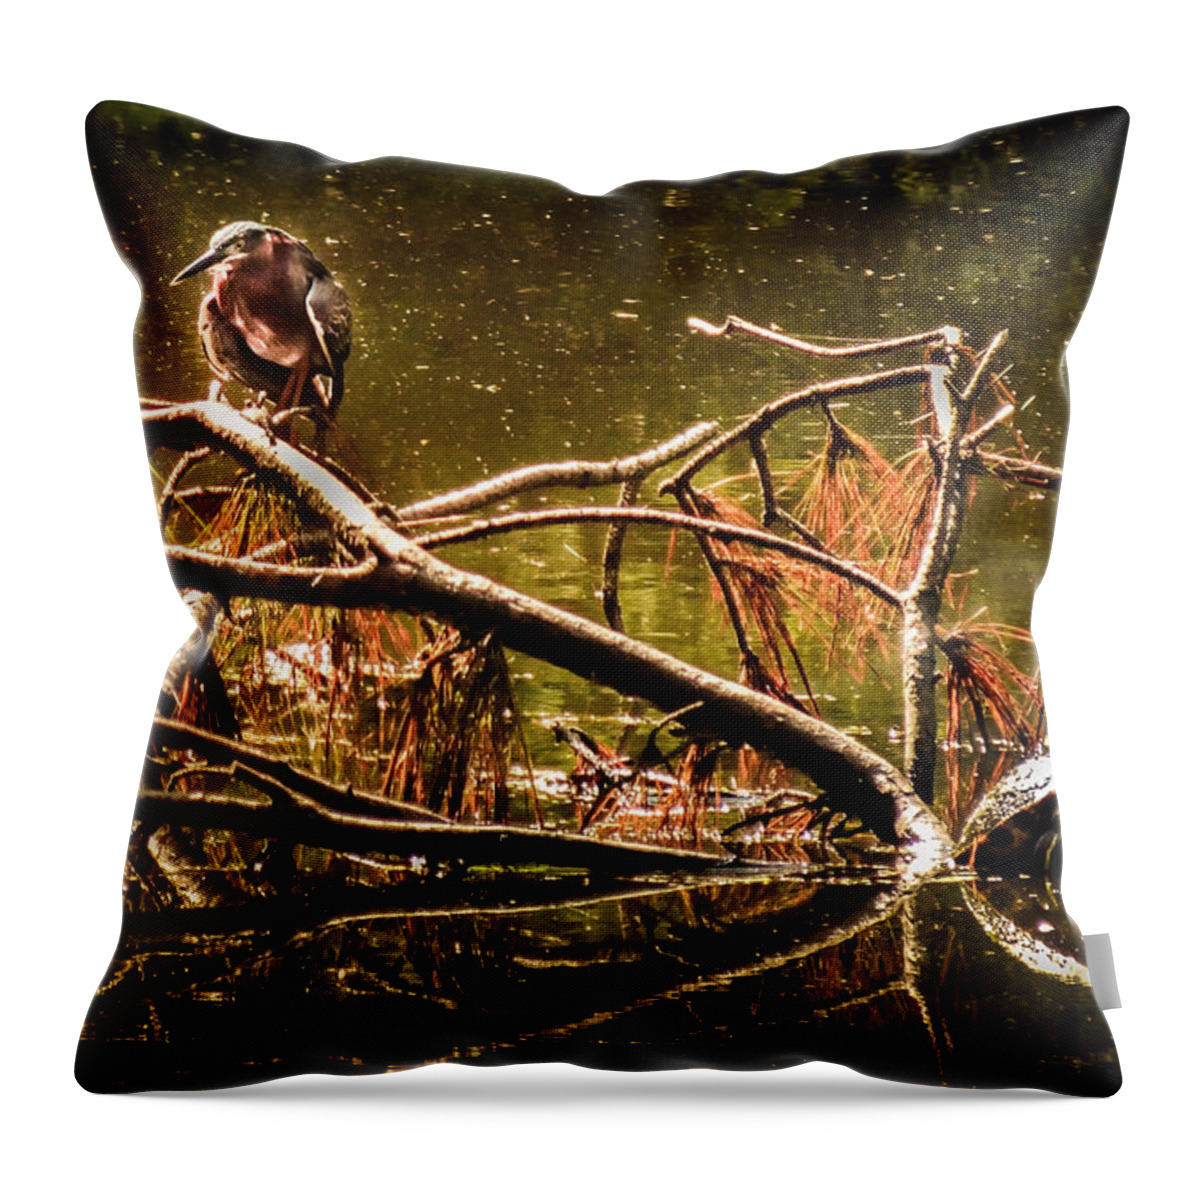 Wildlife Companions Throw Pillow featuring the photograph WATERS of AUTUMN by Karen Wiles